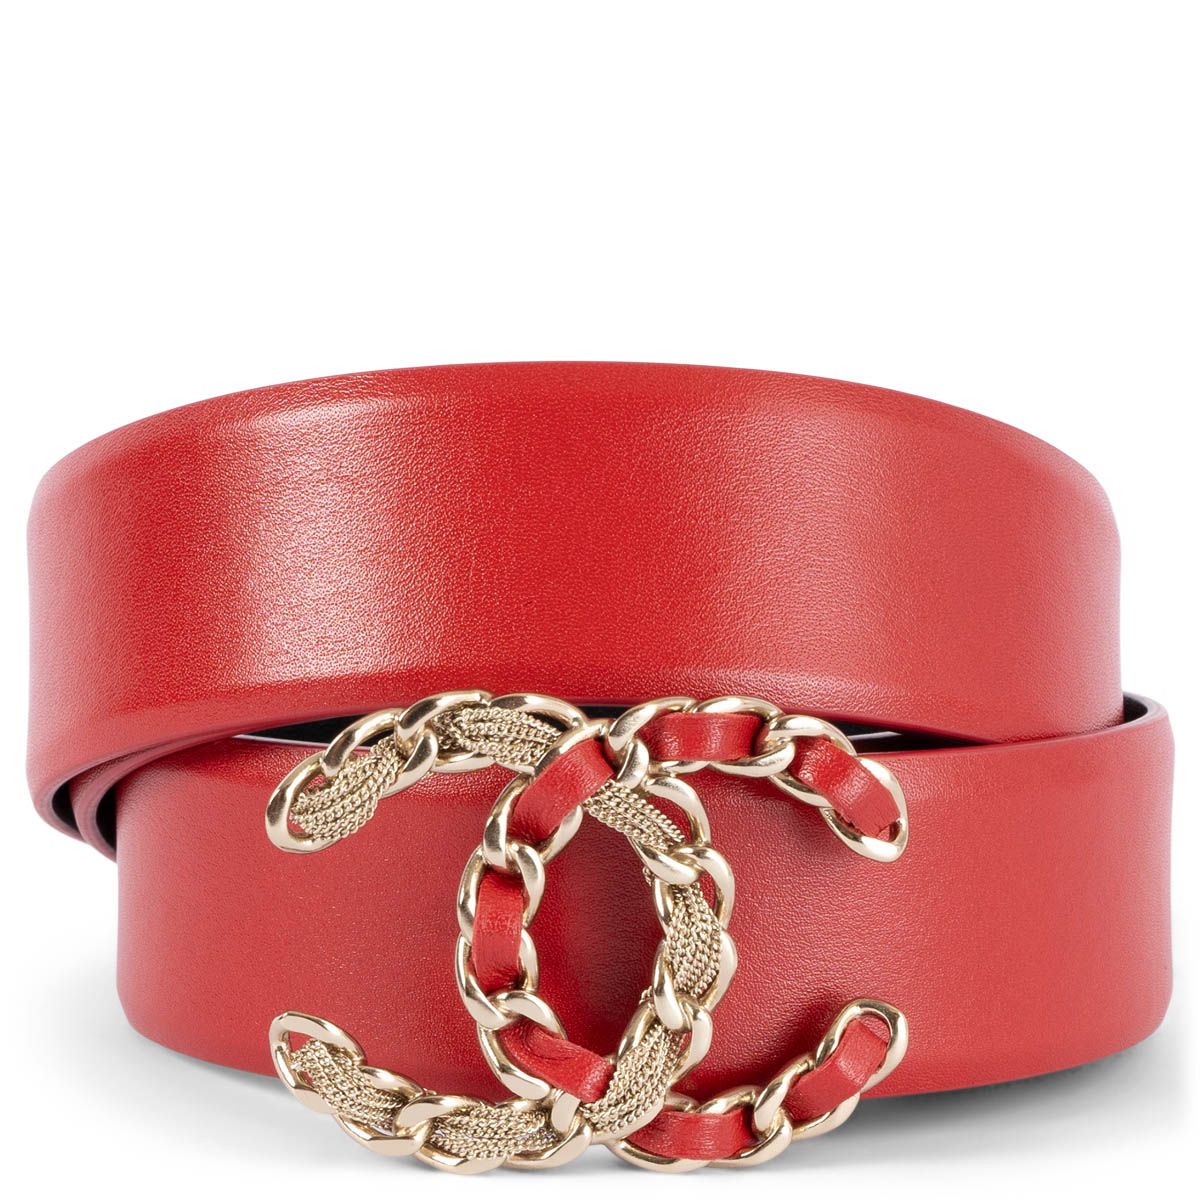 Chanel 2020 20S CC Leather Belt Red Leather 90